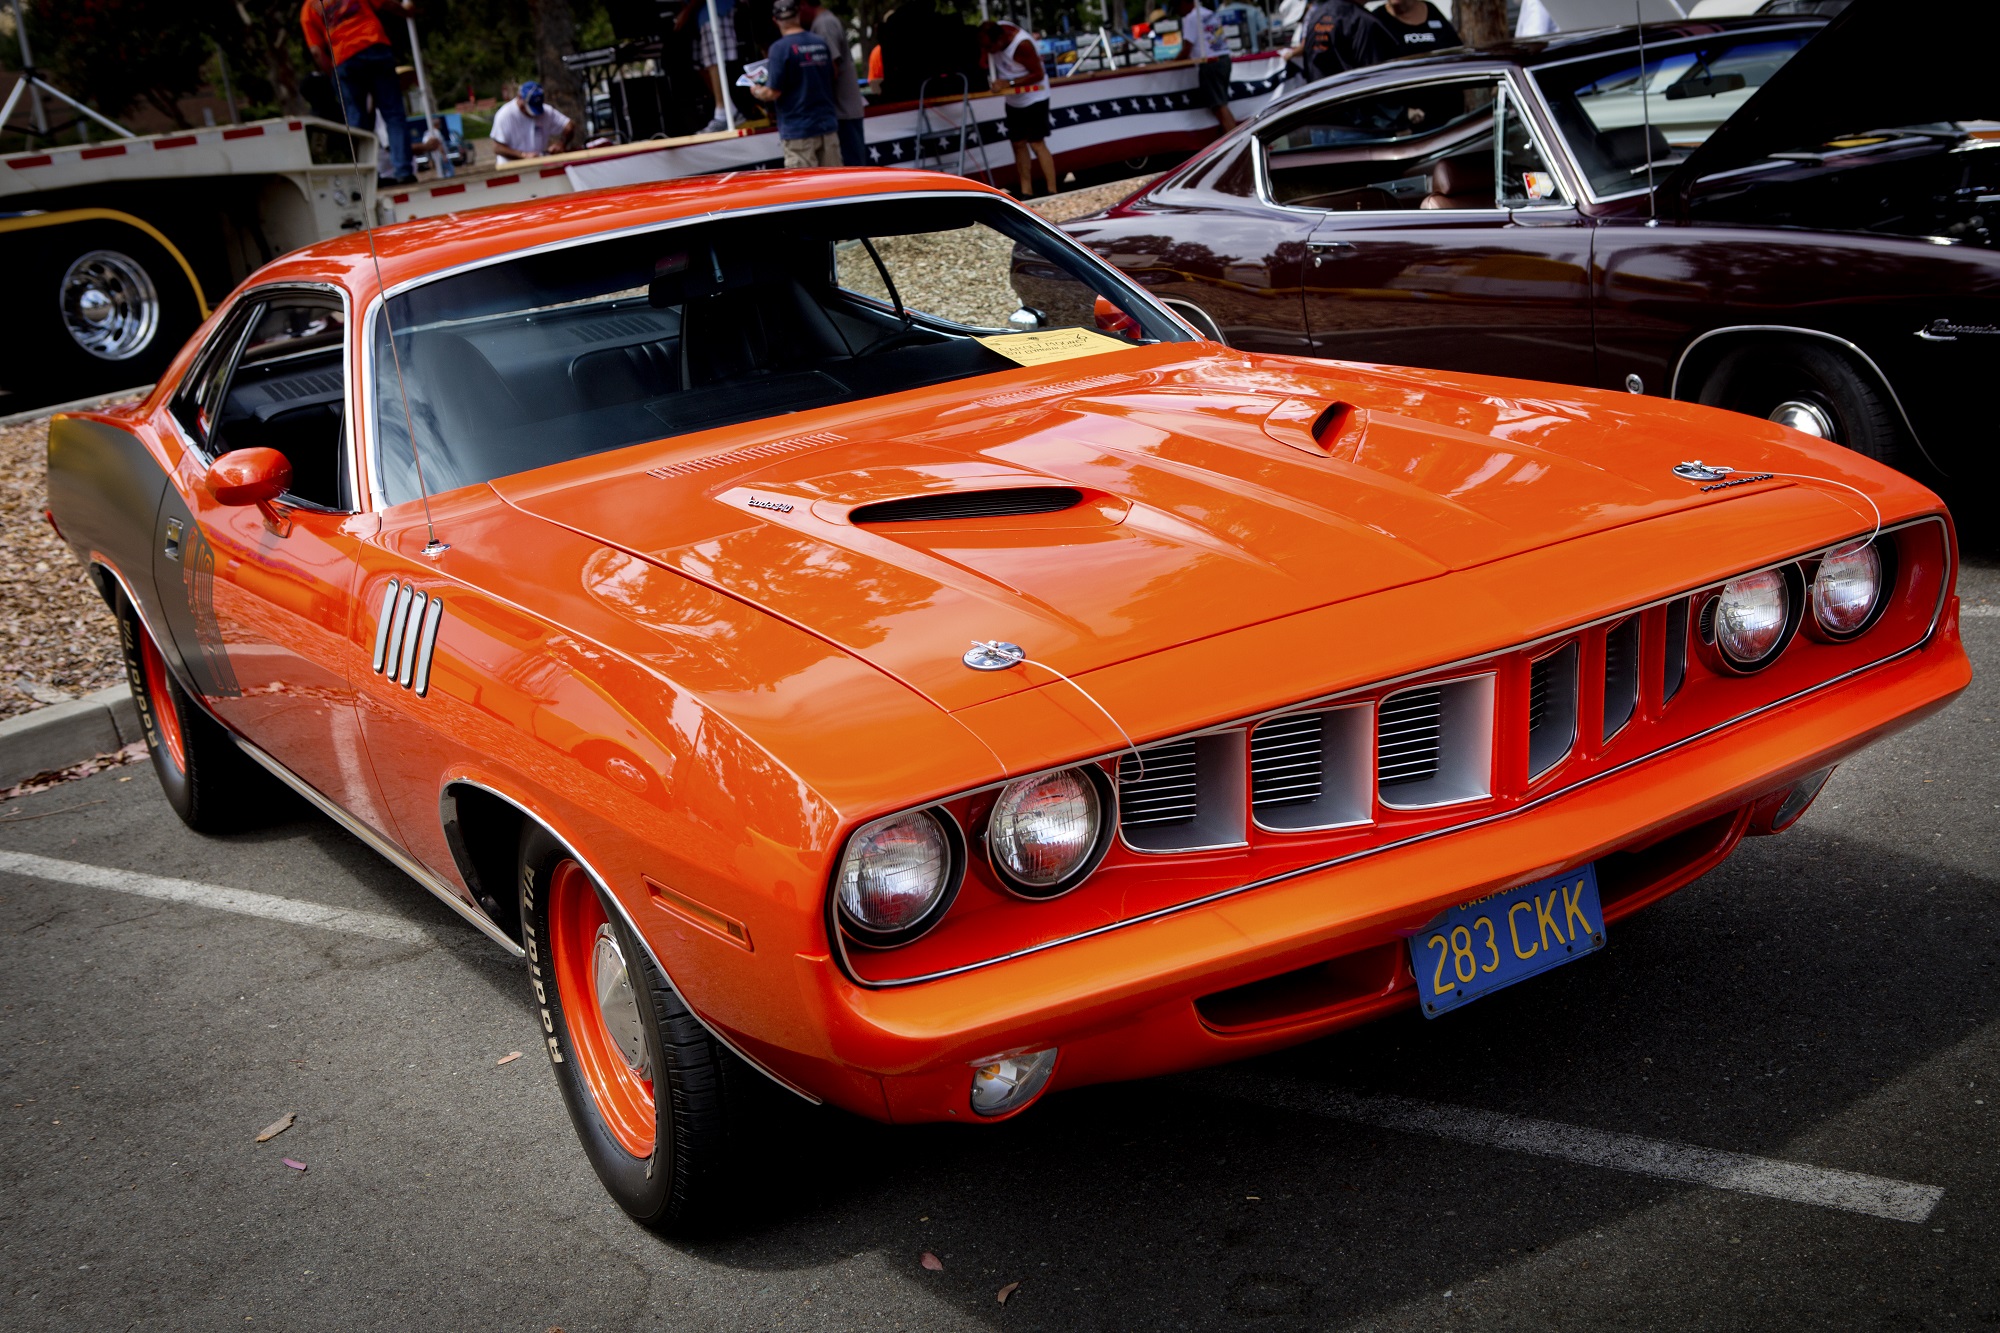 This E-body Plymouth Barracuda shows off its muscle car looks.